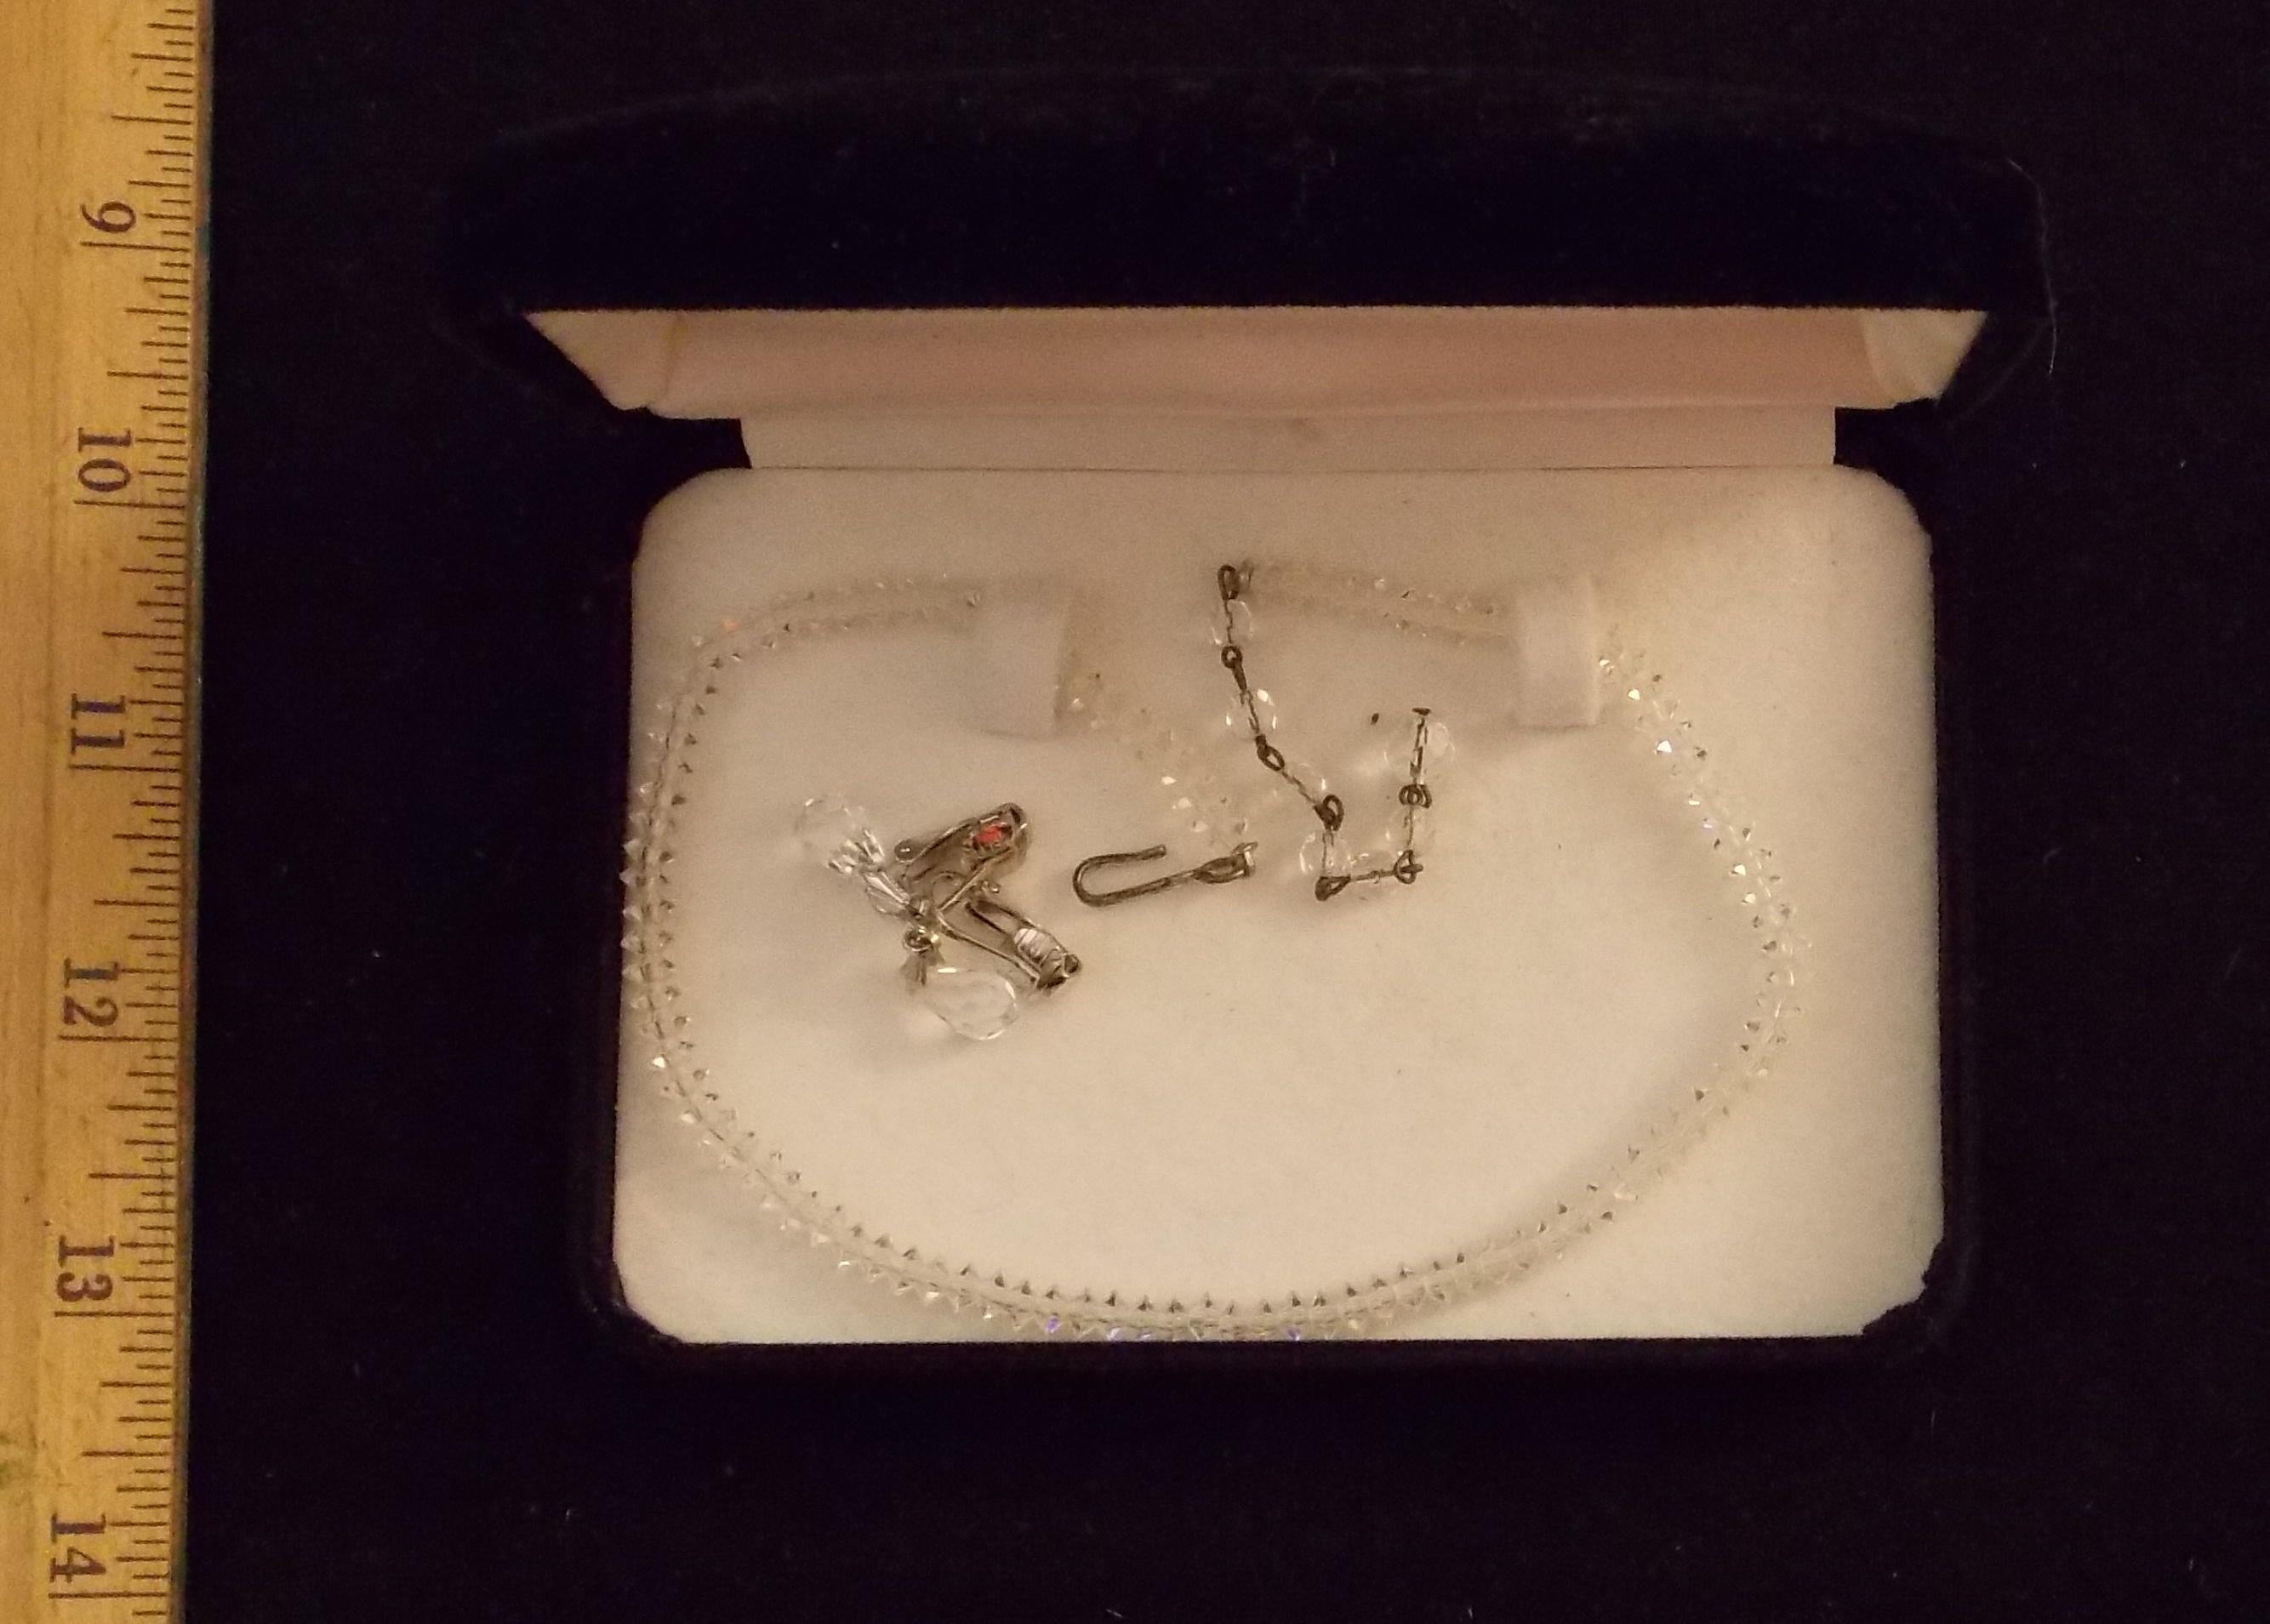 Vintage Necklace and Earring Set with Swarovski Crystal in Box